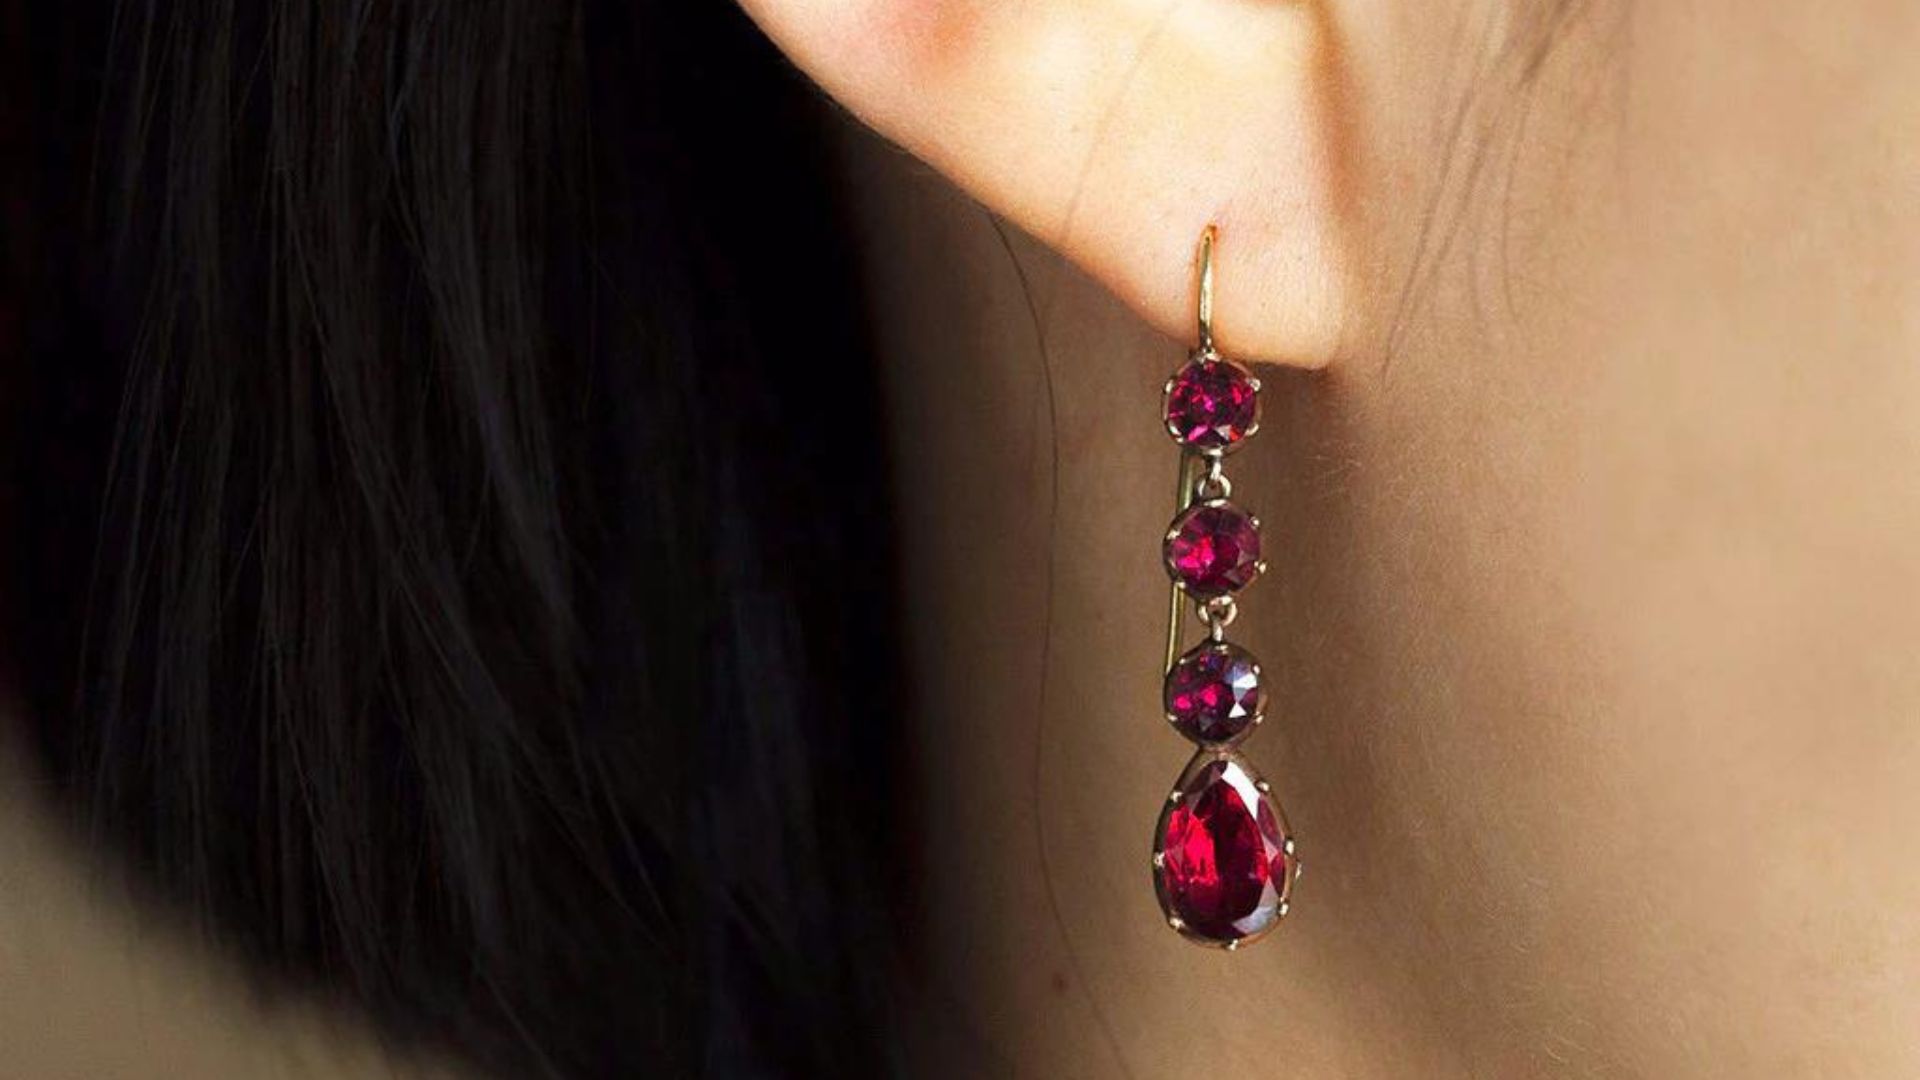 Garnet Earrings - A Beautiful And Timeless Addition To Any Jewelry Collection